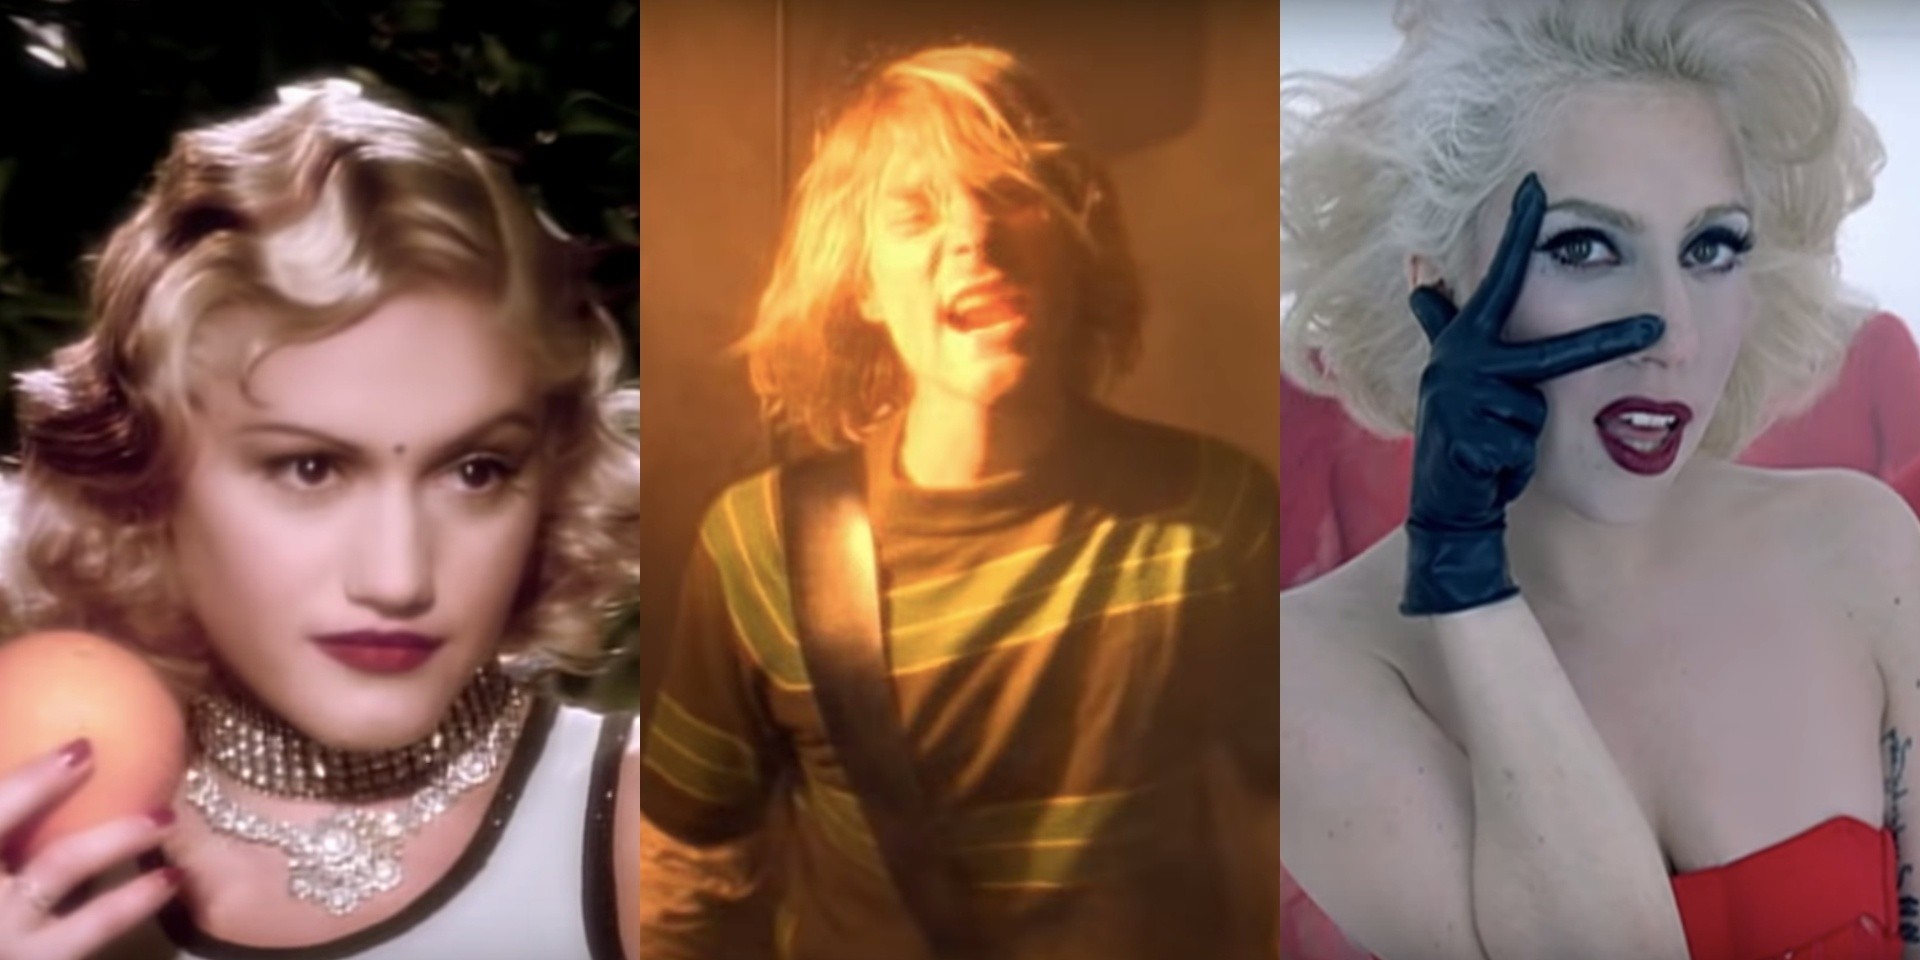 YouTube Music and Universal Music Group remaster classic music videos, including videos from No Doubt, Nirvana, Lady Gaga, and more